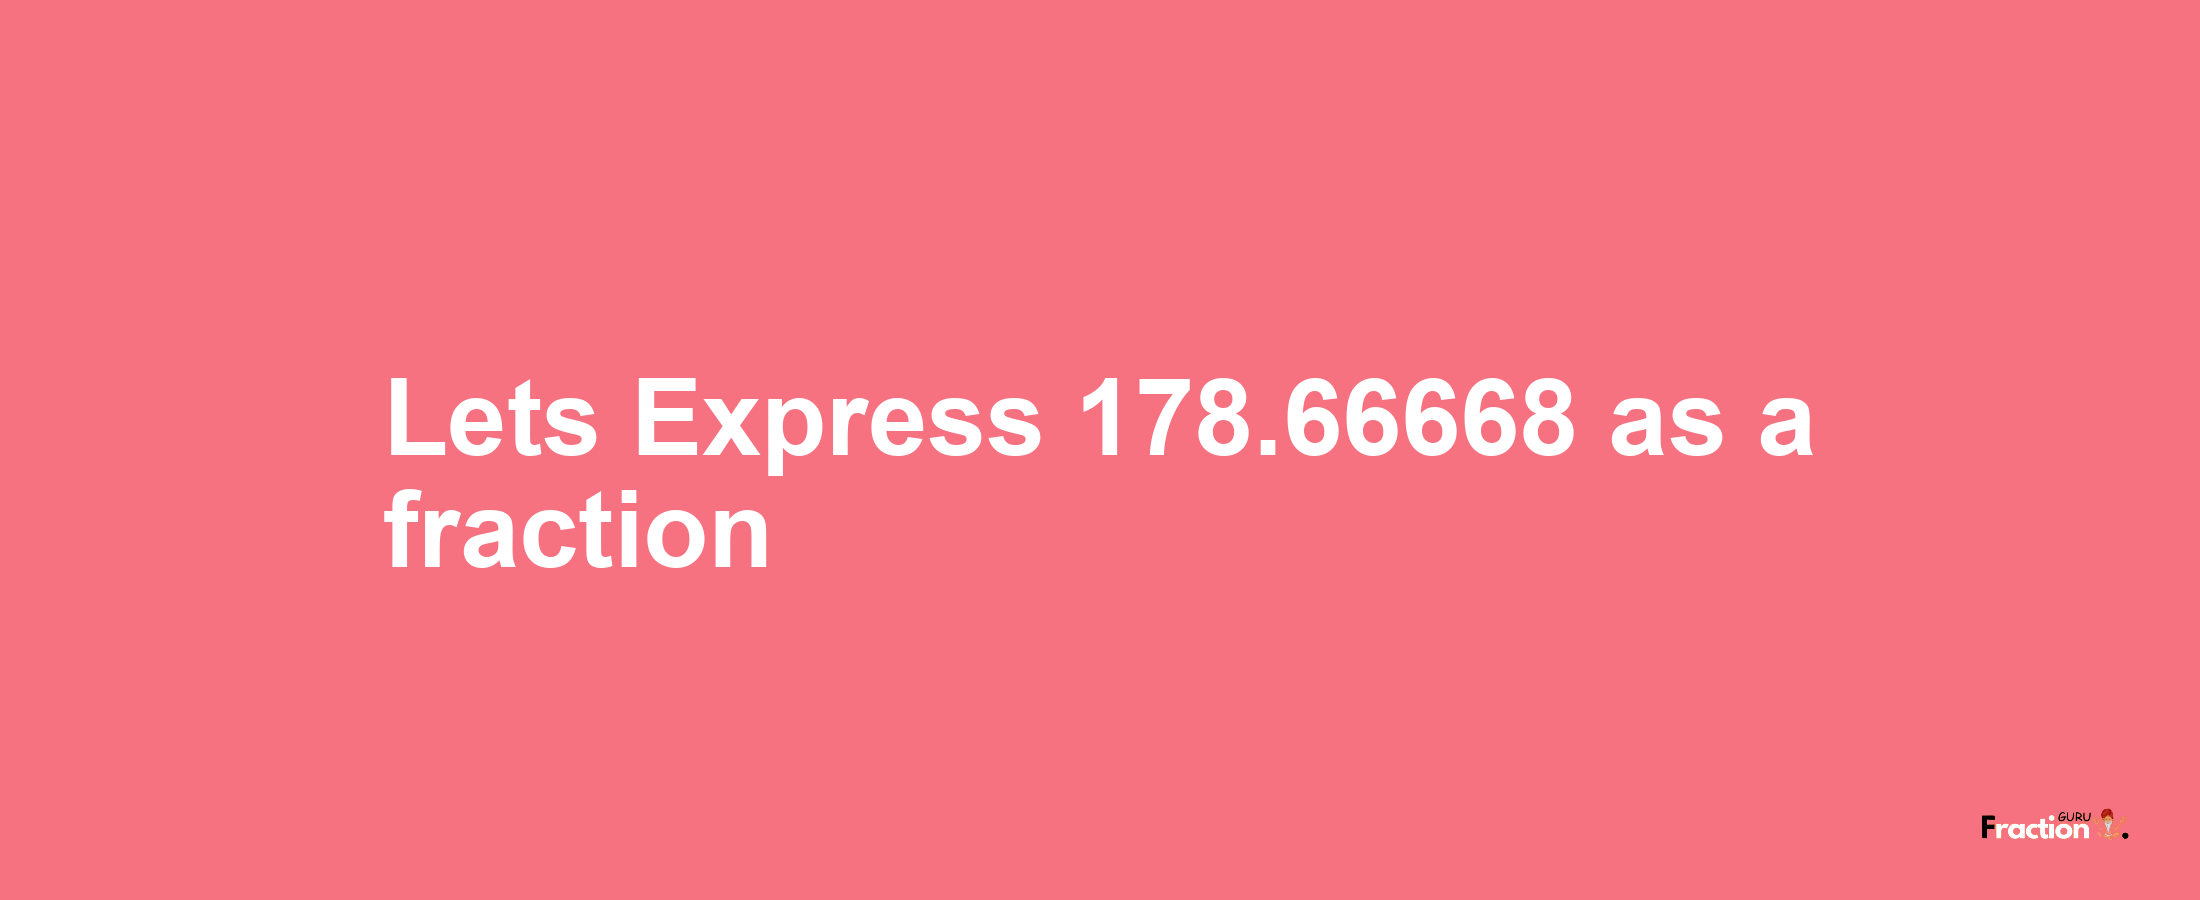 Lets Express 178.66668 as afraction